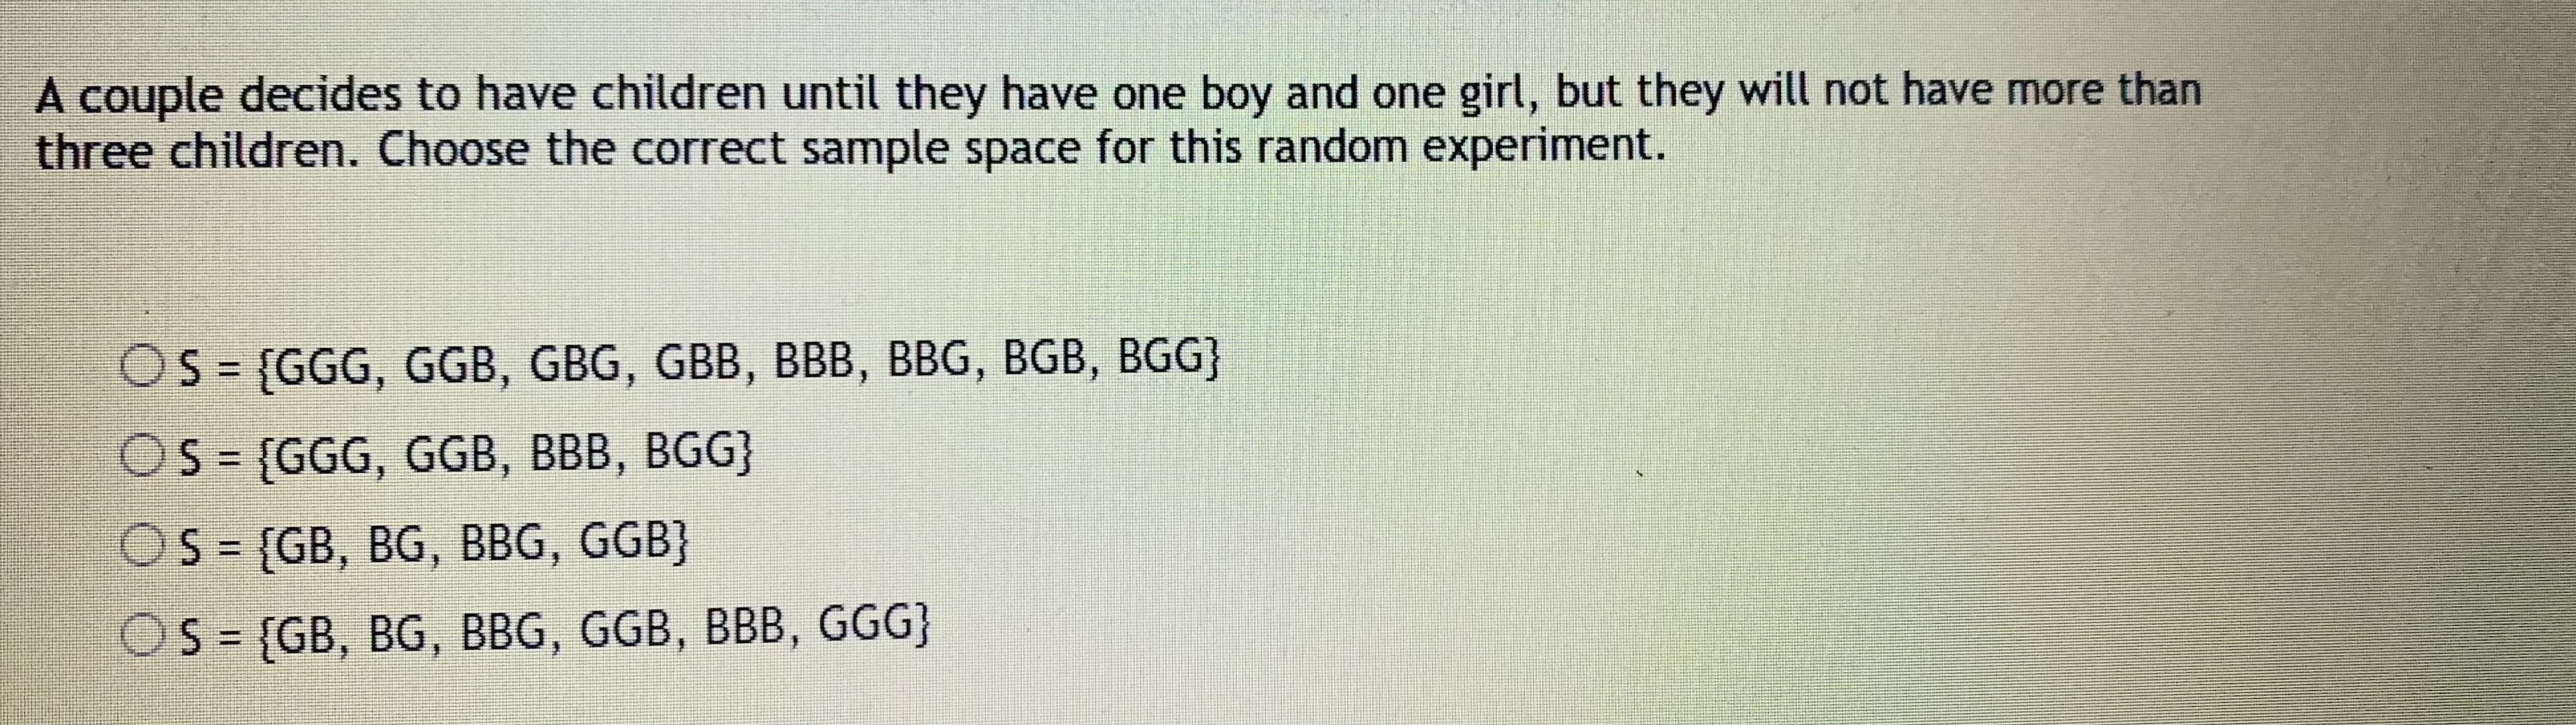 A couple decides to have children until they have one boy and one girl, but they will not have more than
three children. Choose the correct sample space for this random experiment.
